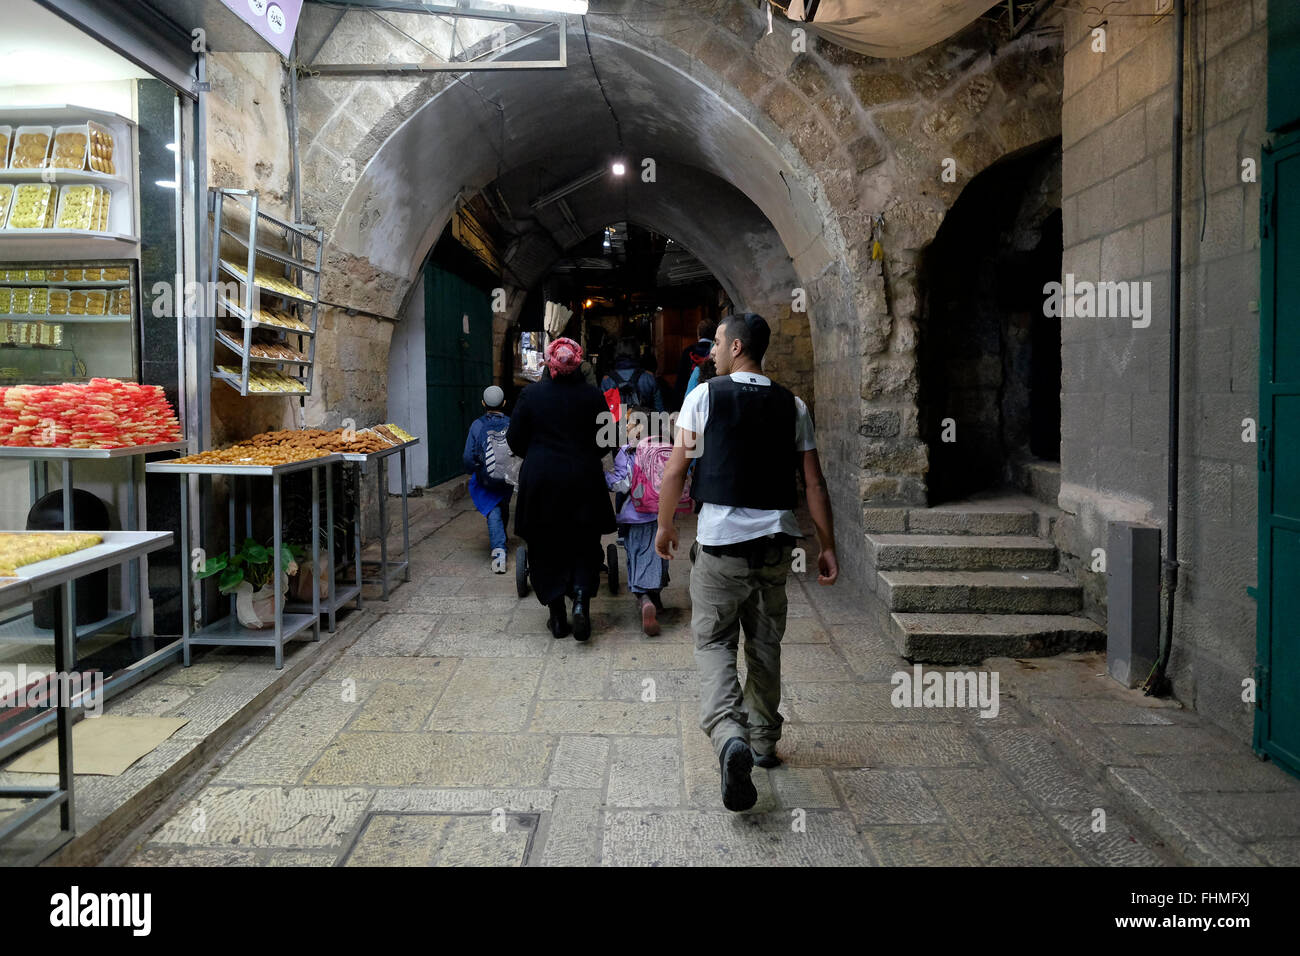 A religious Jewish family being escorted by security guard walk through Al Wad street which Israelis call Haggai street in the Muslim Quarter in the old city East Jerusalem Israel on 16 October 2015  The Housing Ministry has been funding security for settlers in East Jerusalem since the 1990s, through private security firms, who watch over ideological settlers who have implanted themselves in the heart of Palestinian neighborhoods in East Jerusalem. The number of Jews living in these areas is estimated at less than 3,000. Stock Photo